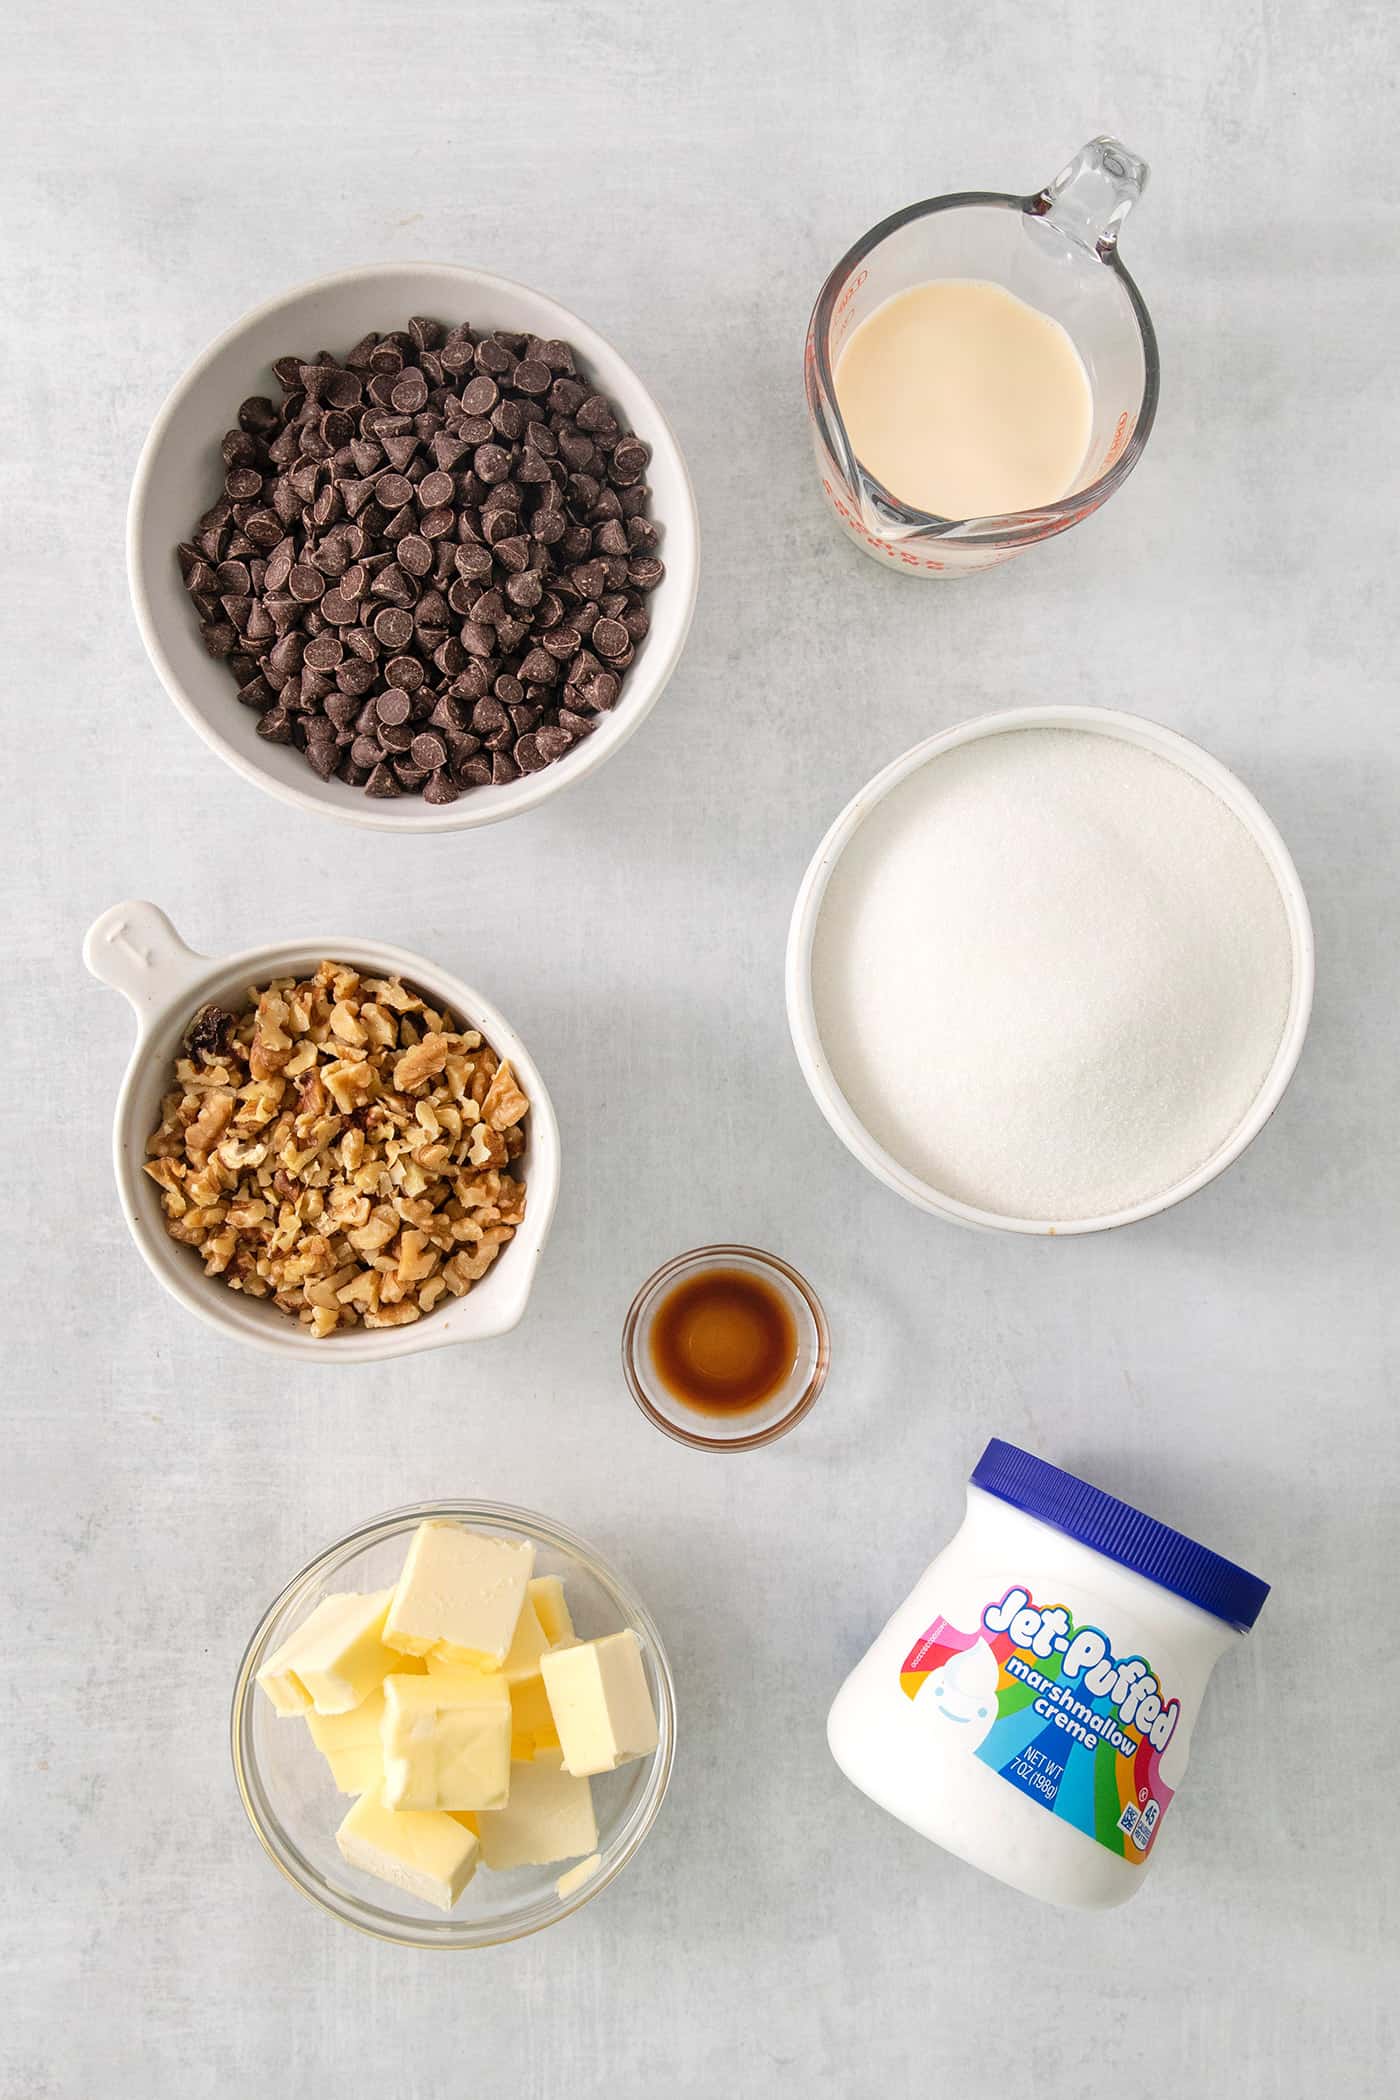 Ingredients needed for Fantasy Fudge are shown on a white background: chocolate chips, marshmallow creme, nuts, butter, sugar, and salt.